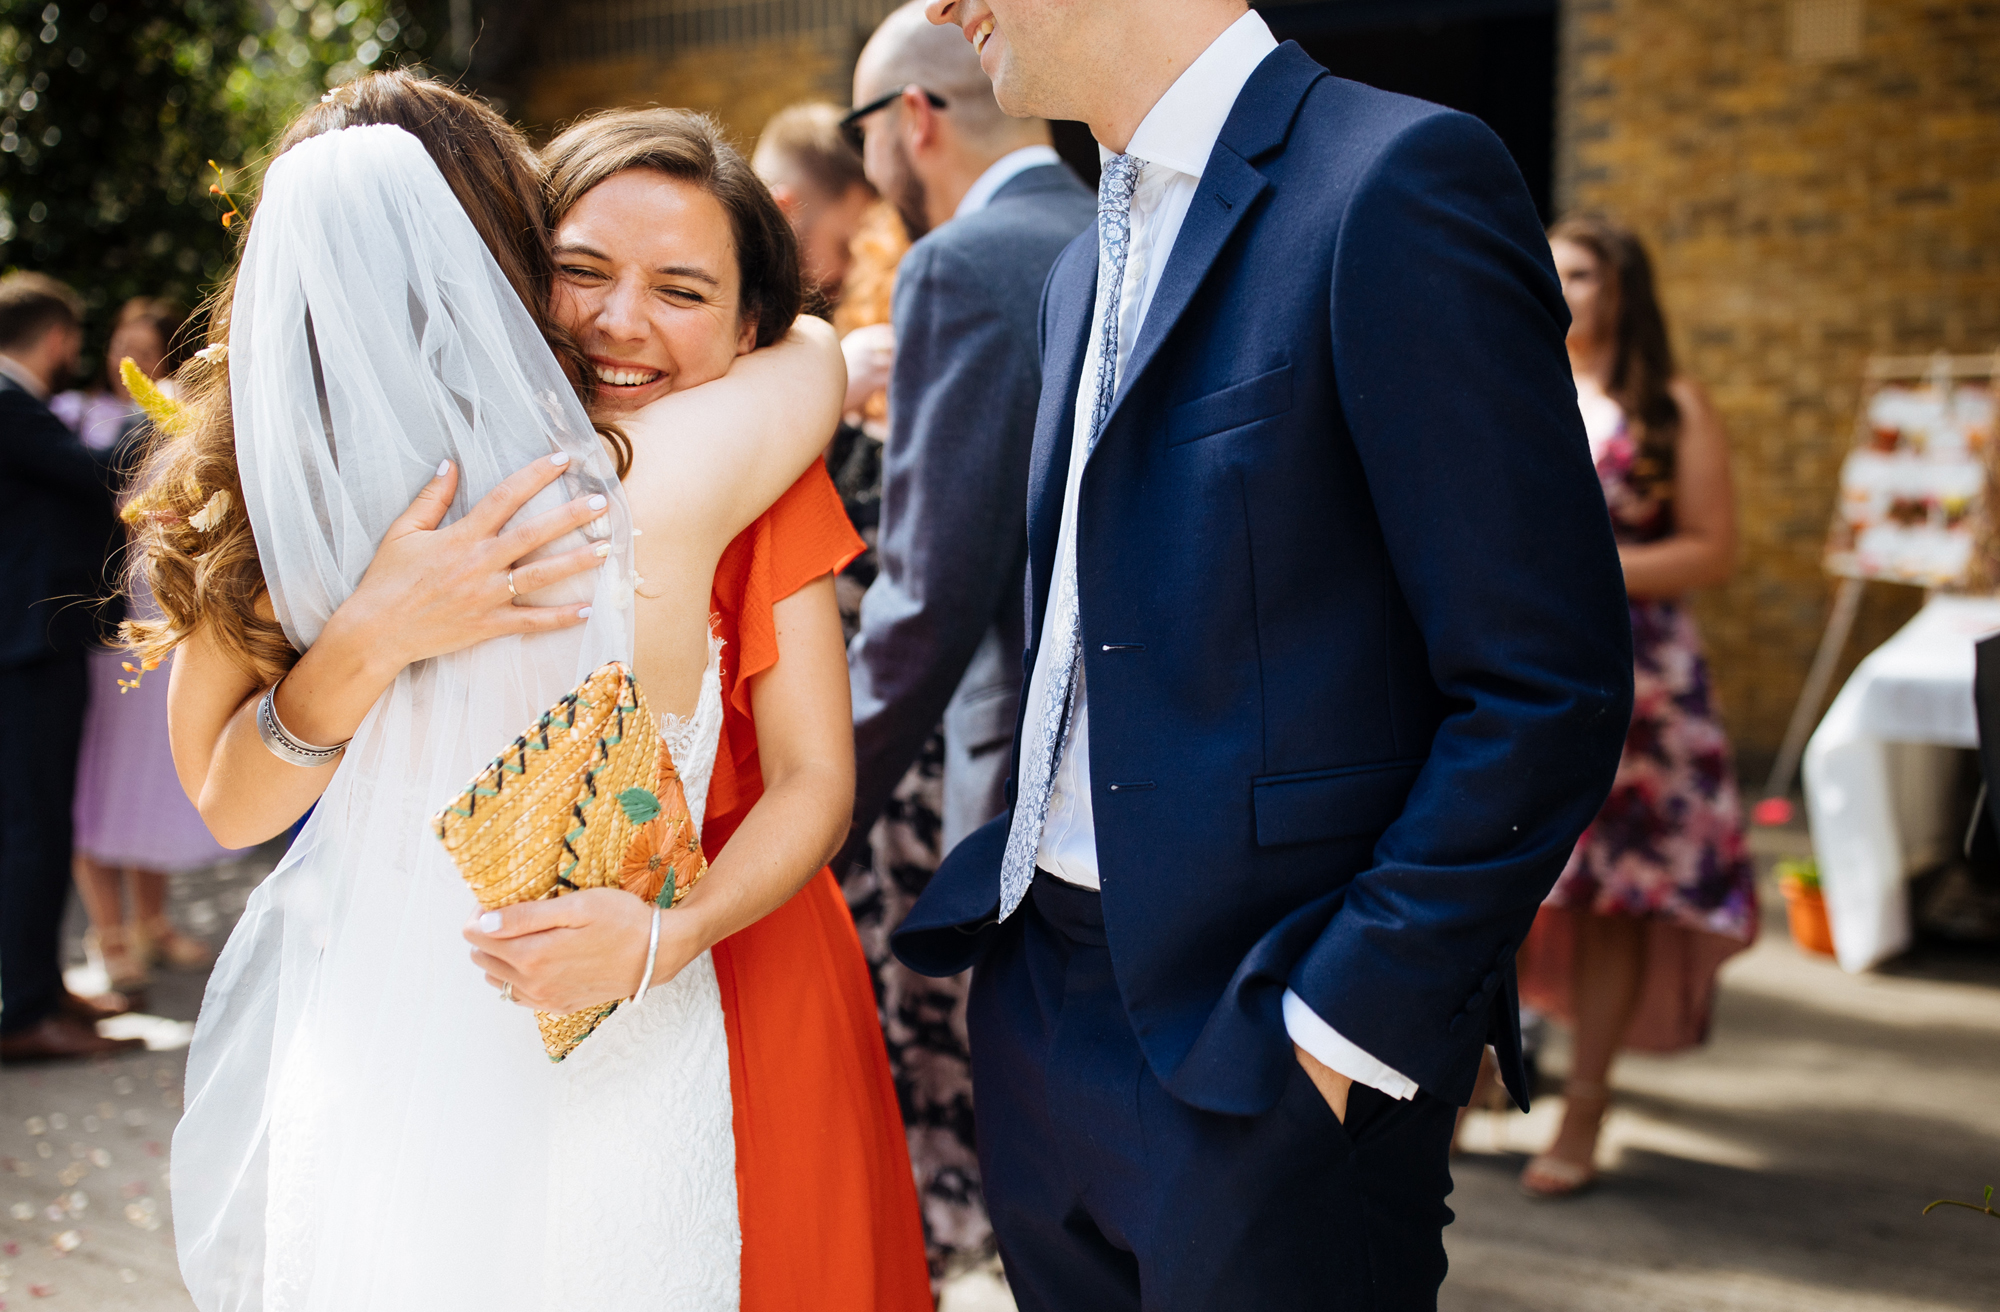 An Urban and colourful wedding in South London